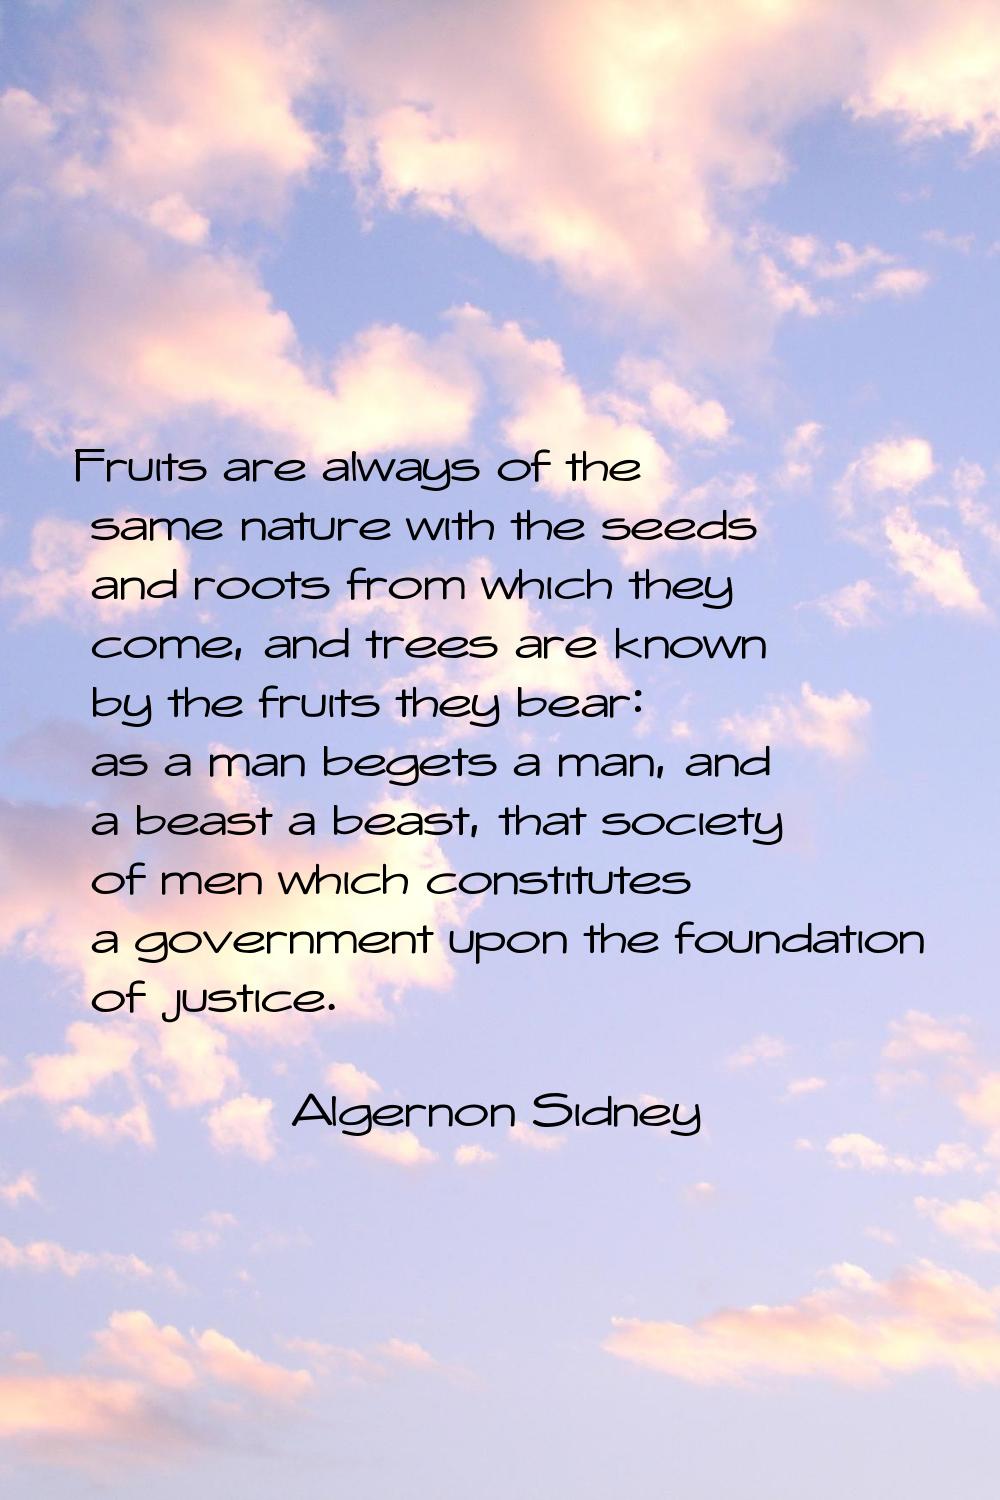 Fruits are always of the same nature with the seeds and roots from which they come, and trees are k